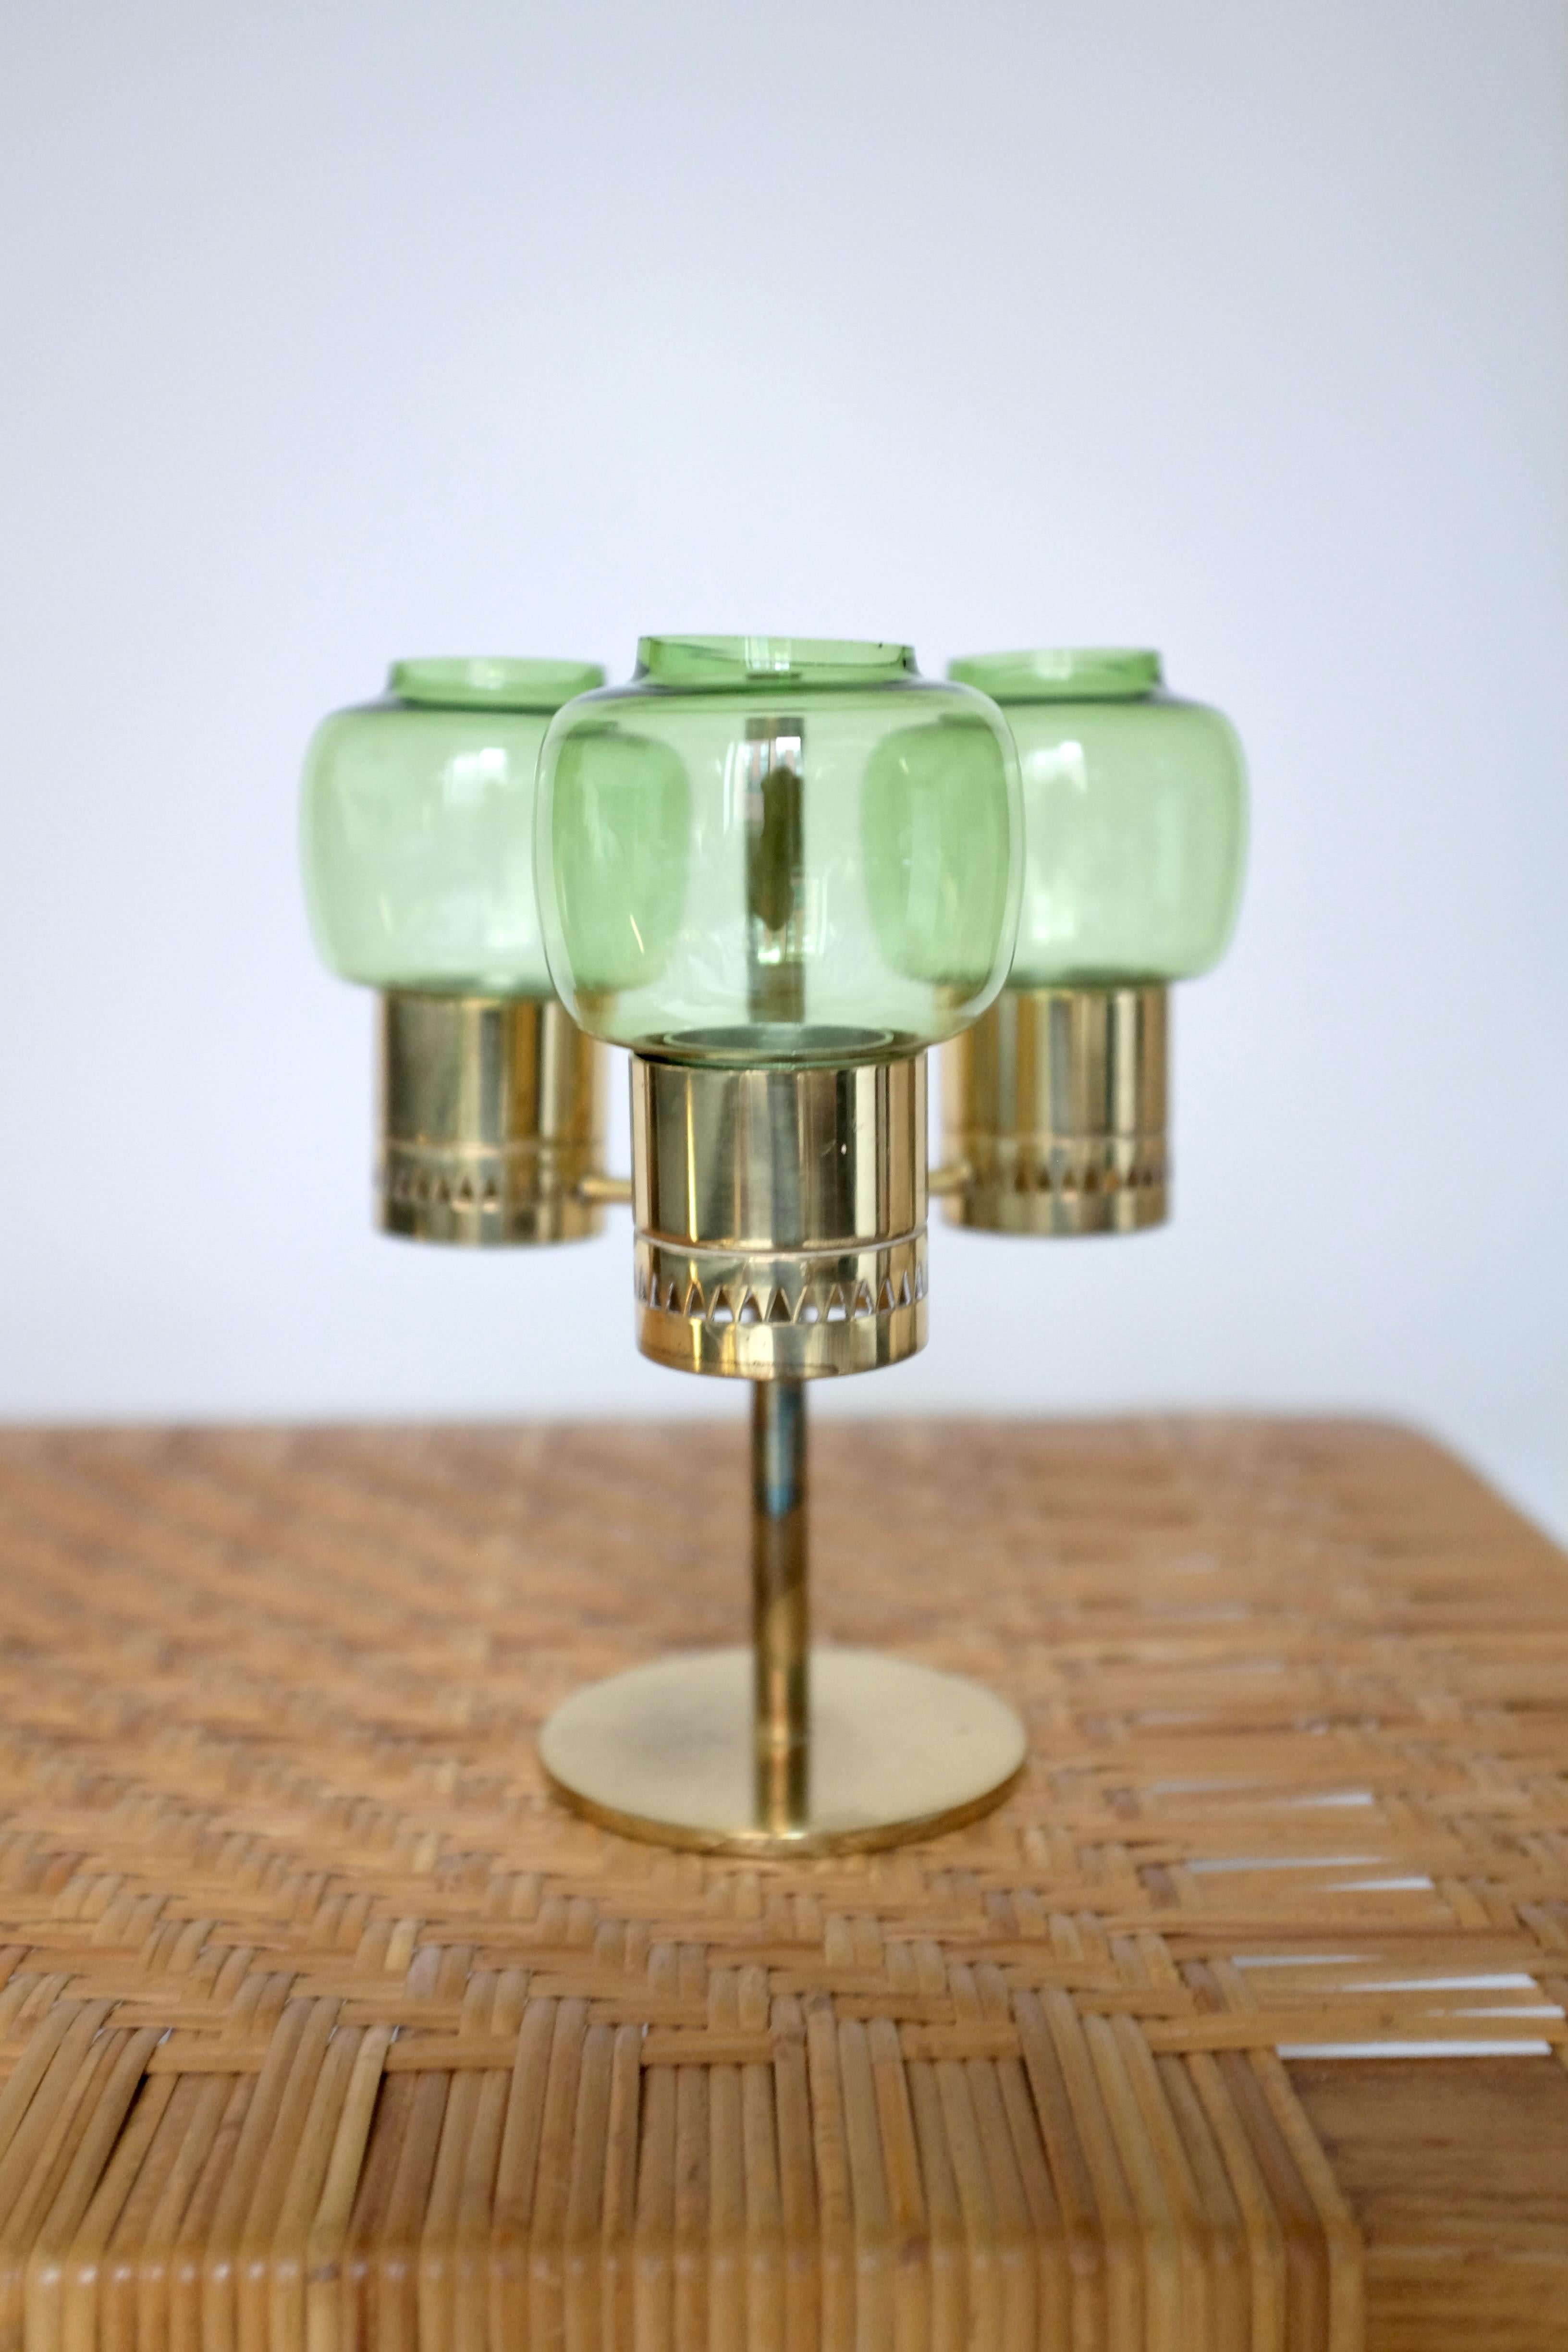 Beautiful Brass candleholder with 3 green lanterns by Hans-Agne Jakobsson. Produced by the designer own company in Markaryd, Sweden, in the 1950's and in a very good vintage condition with age appropriate wear to the brass. 

Maker: Hans-Agne